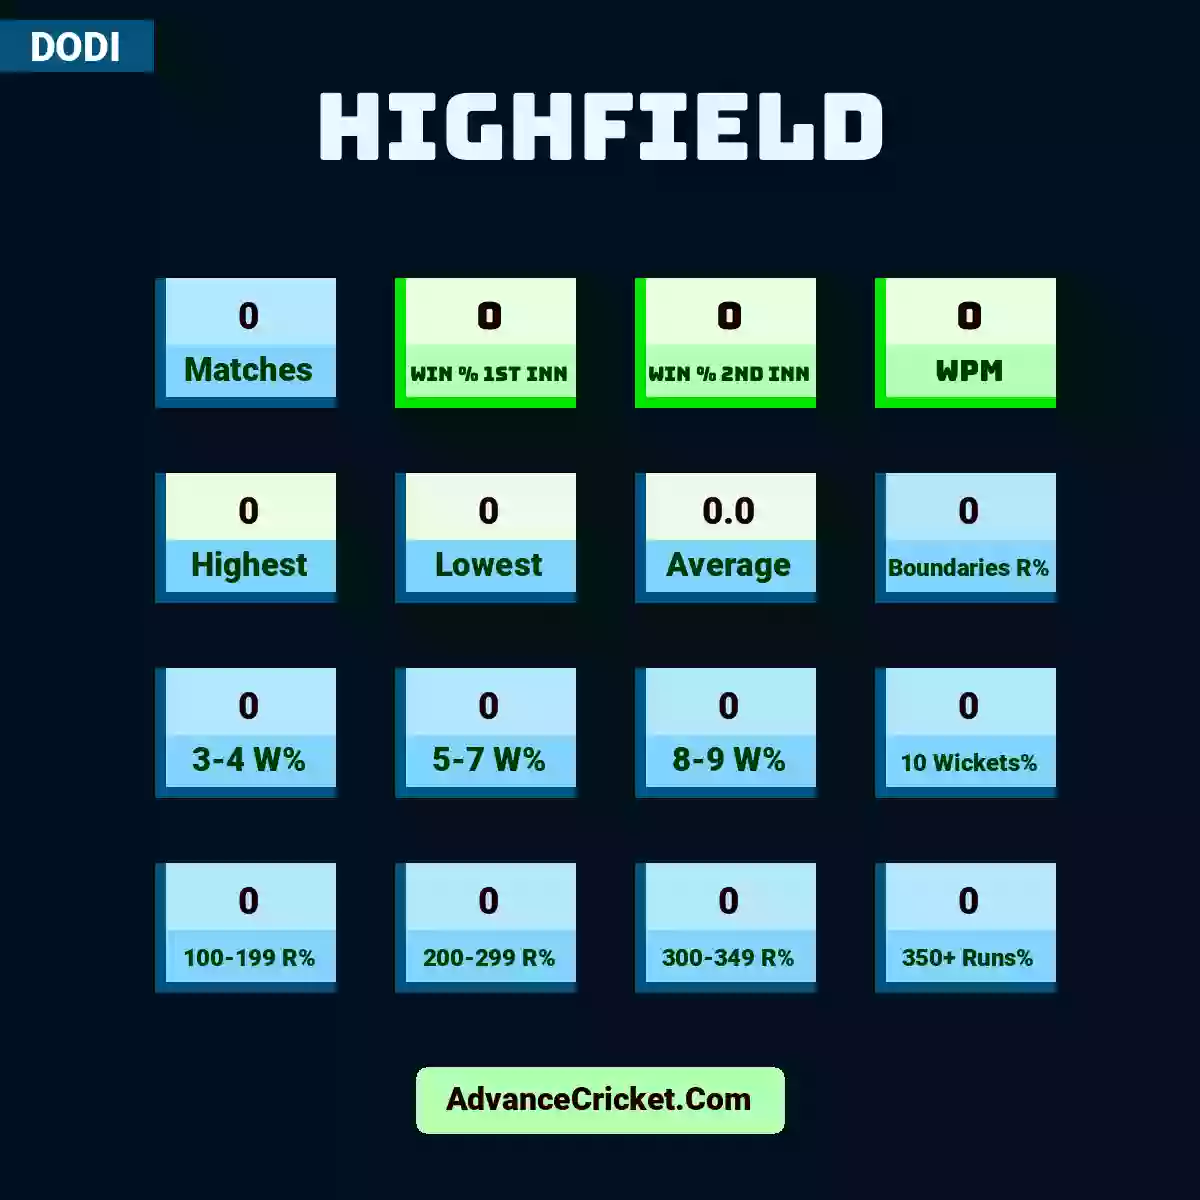 Image showing Highfield with Matches: 0, Win % 1st Inn: 0, Win % 2nd Inn: 0, WPM: 0, Highest: 0, Lowest: 0, Average: 0.0, Boundaries R%: 0, 3-4 W%: 0, 5-7 W%: 0, 8-9 W%: 0, 10 Wickets%: 0, 100-199 R%: 0, 200-299 R%: 0, 300-349 R%: 0, 350+ Runs%: 0.